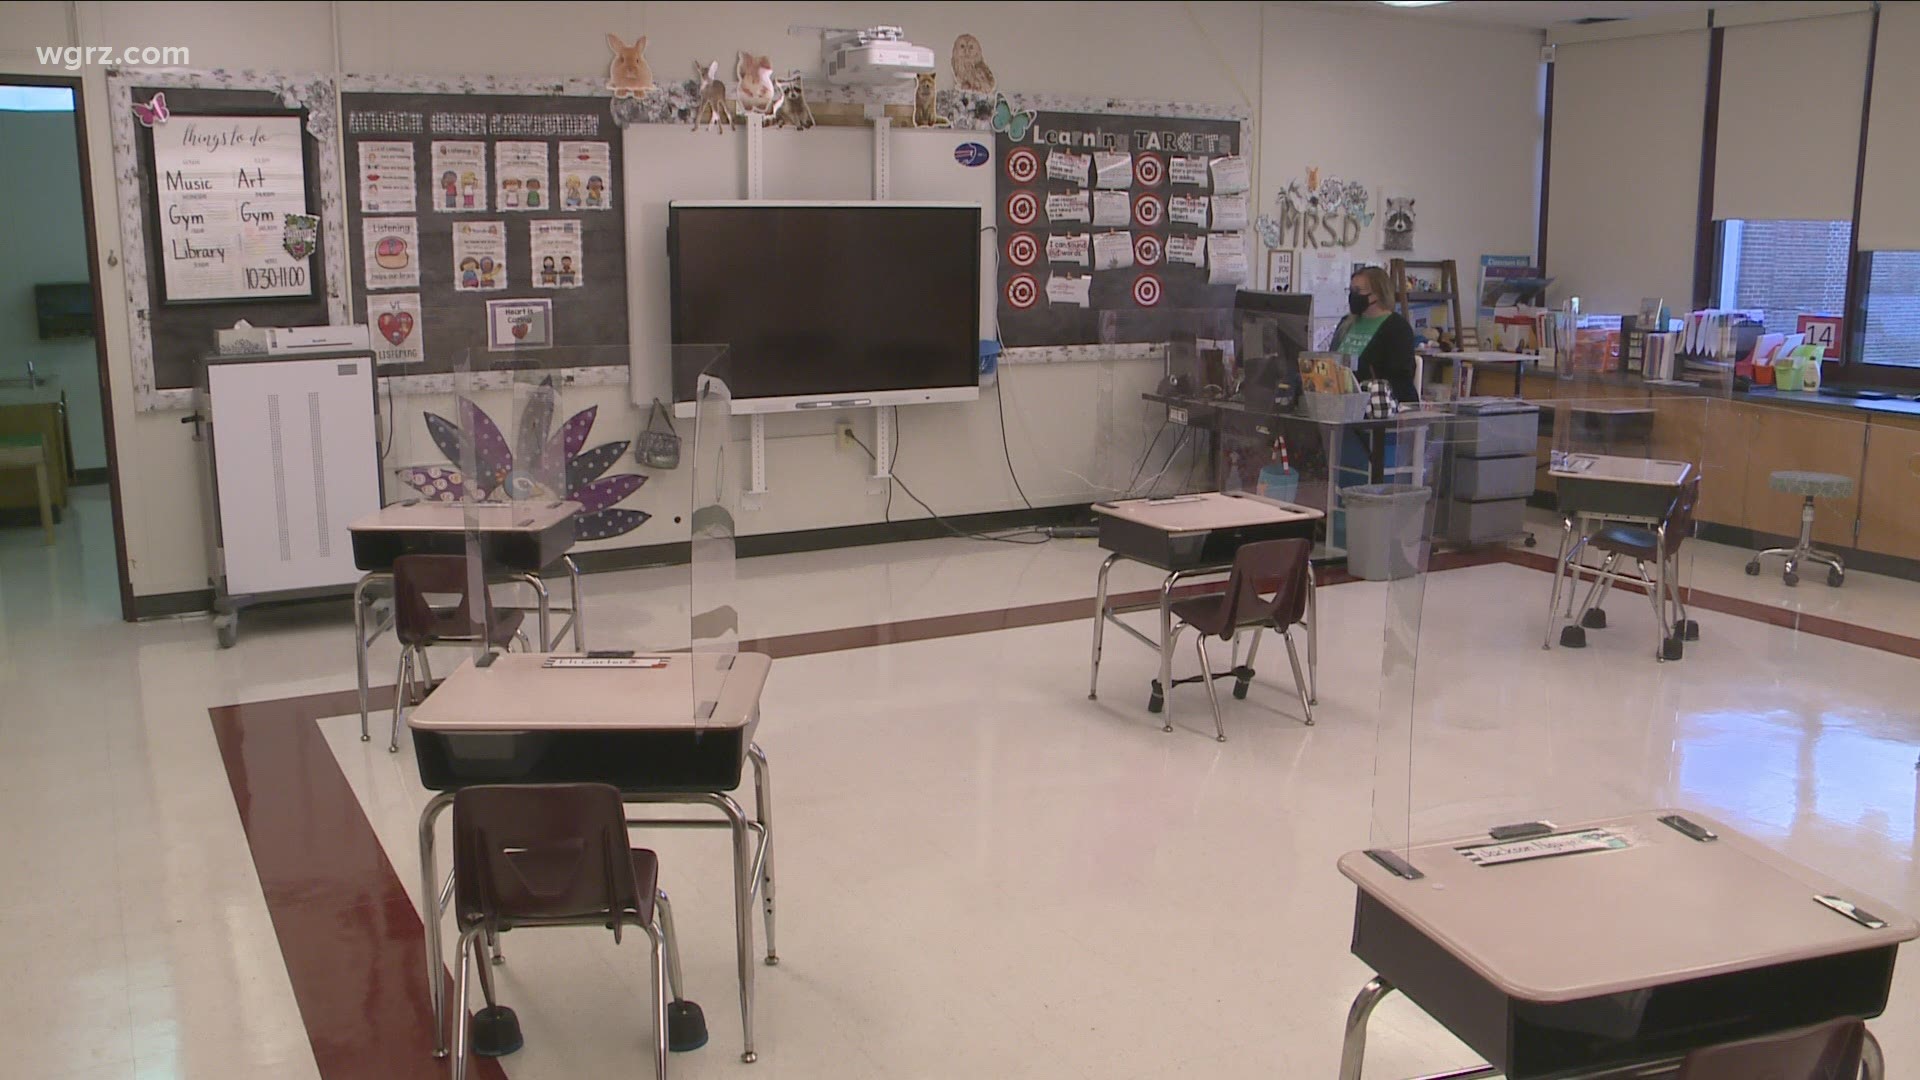 Maryvale preps to have kids back in school